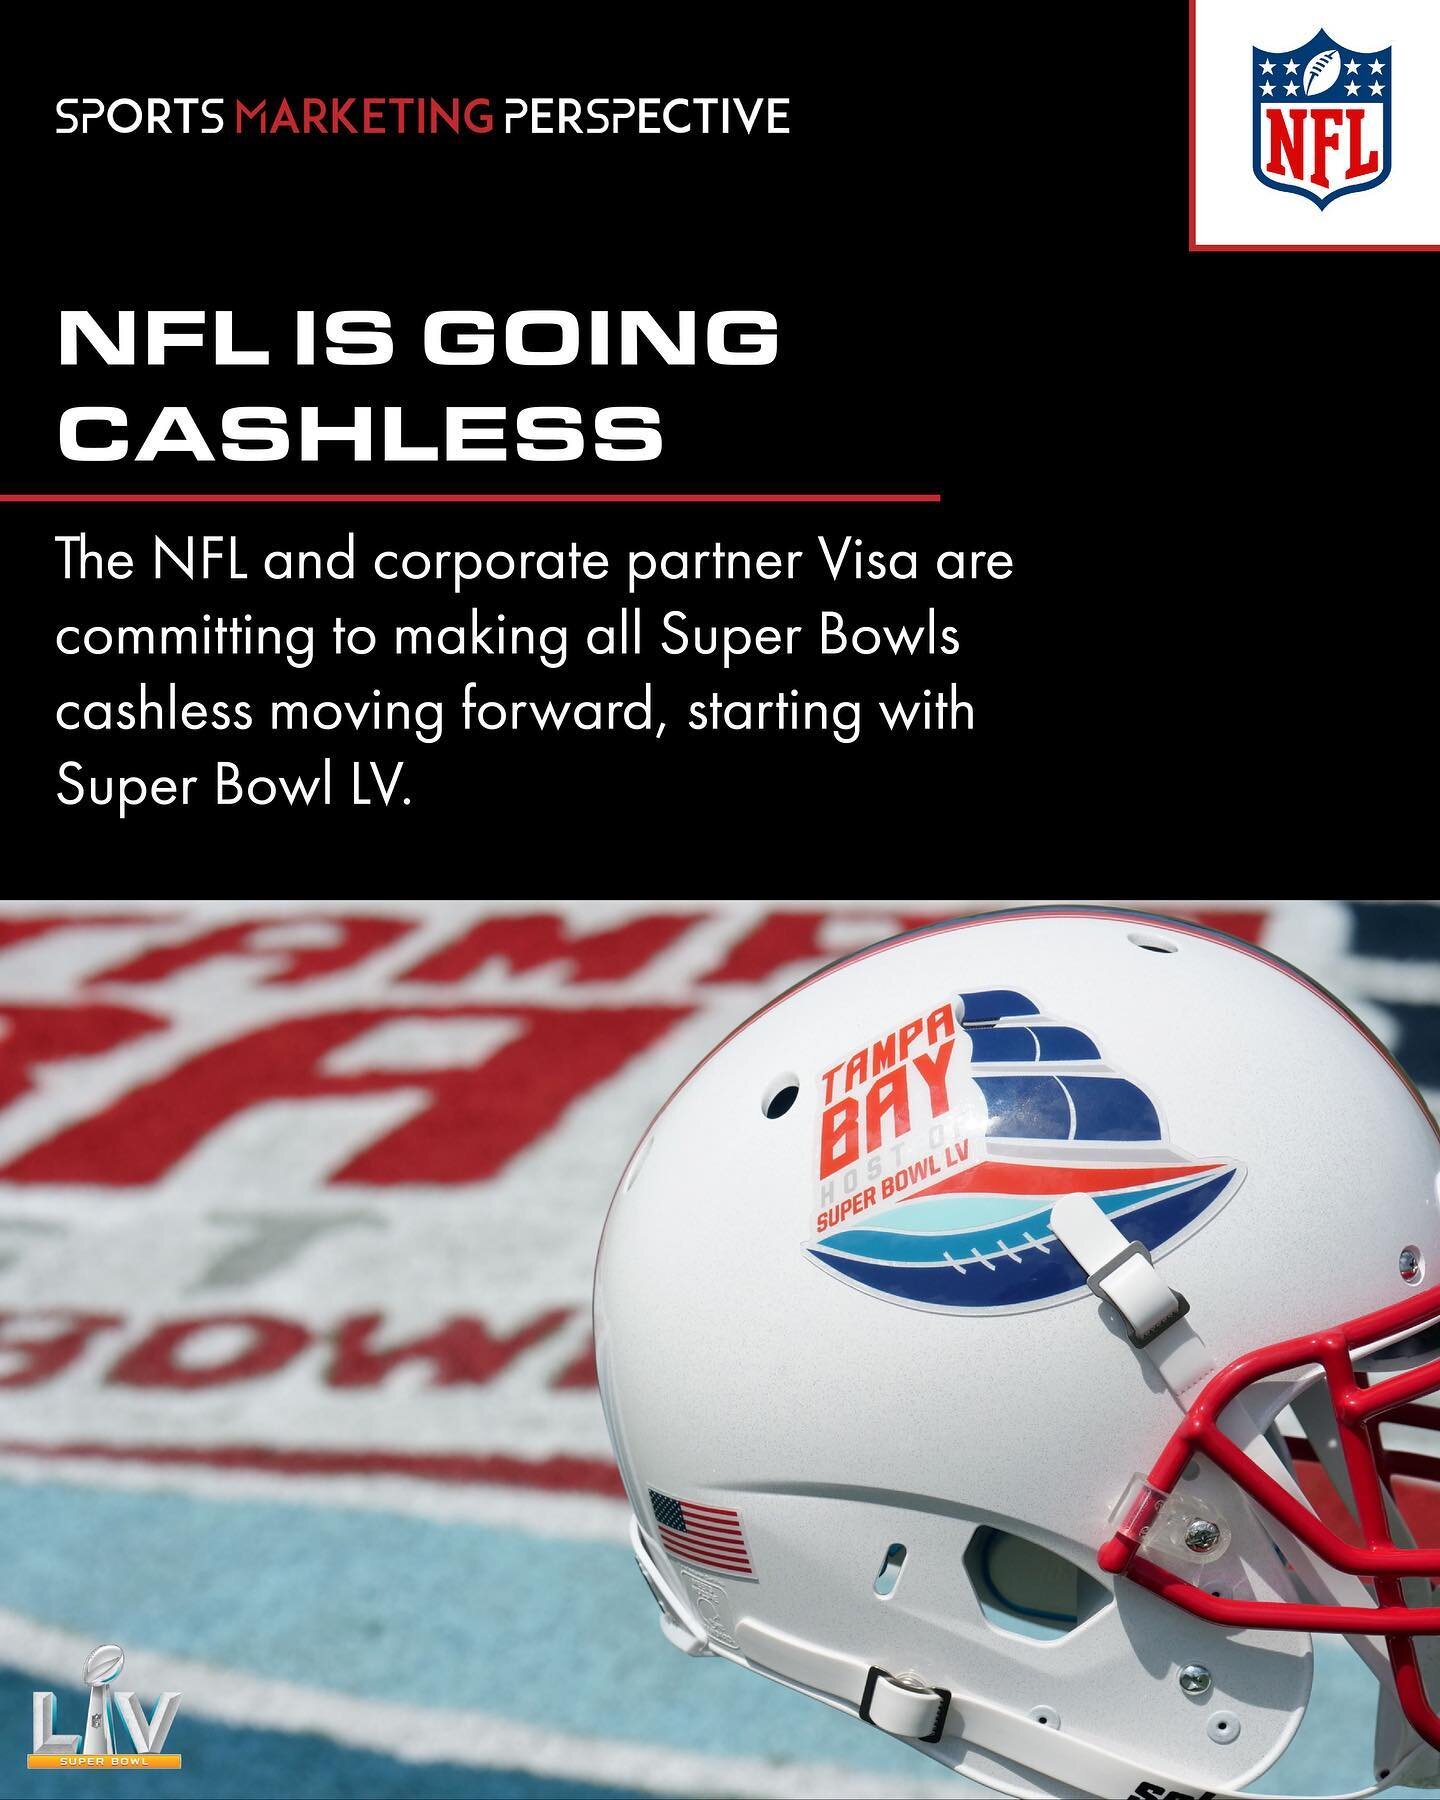 It&rsquo;s been in the works, now the NFL and Visa are executing on their goal to go cashless. With COVID-19 precautions, this seems to be the perfect time for the NFL to make their in-venue experiences safer for all attendees.
.
.
.
.

#SMP #SportsM